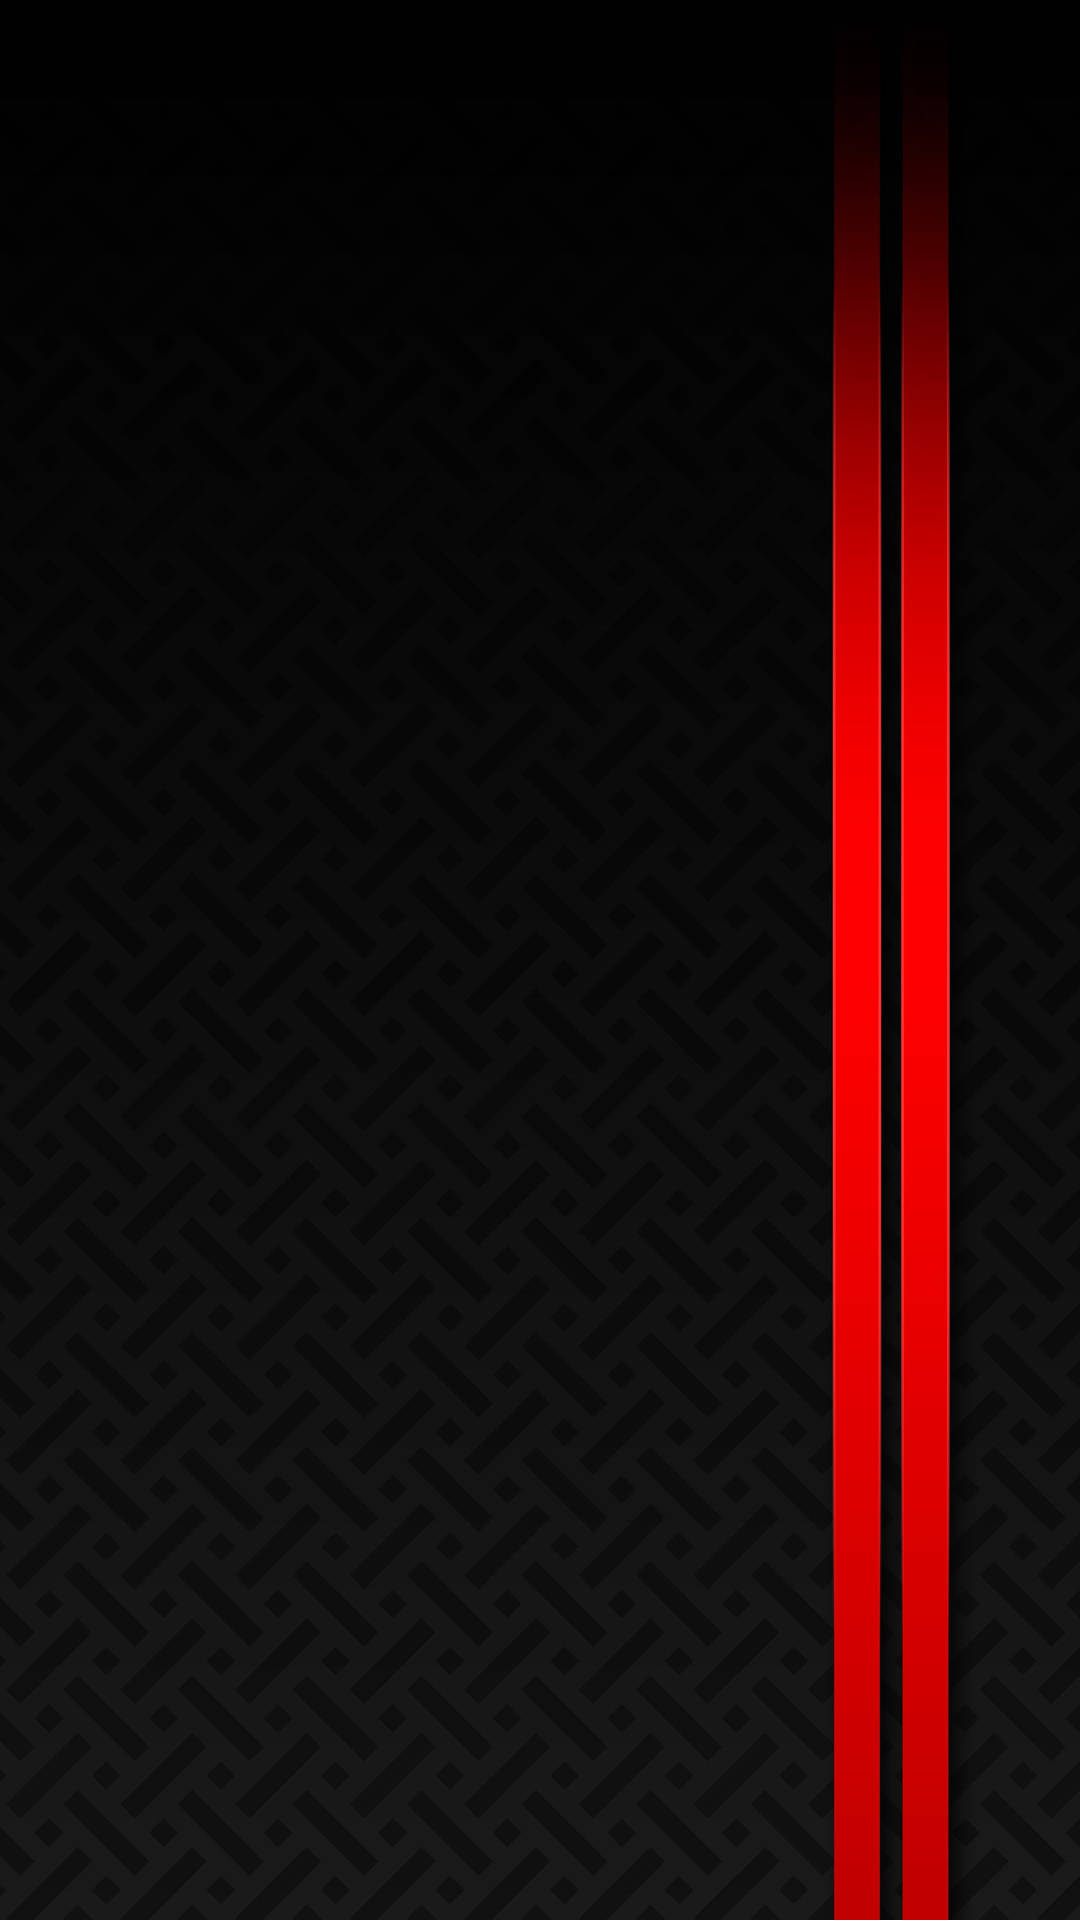 Abstract Metallic Red And Black Pattern Background